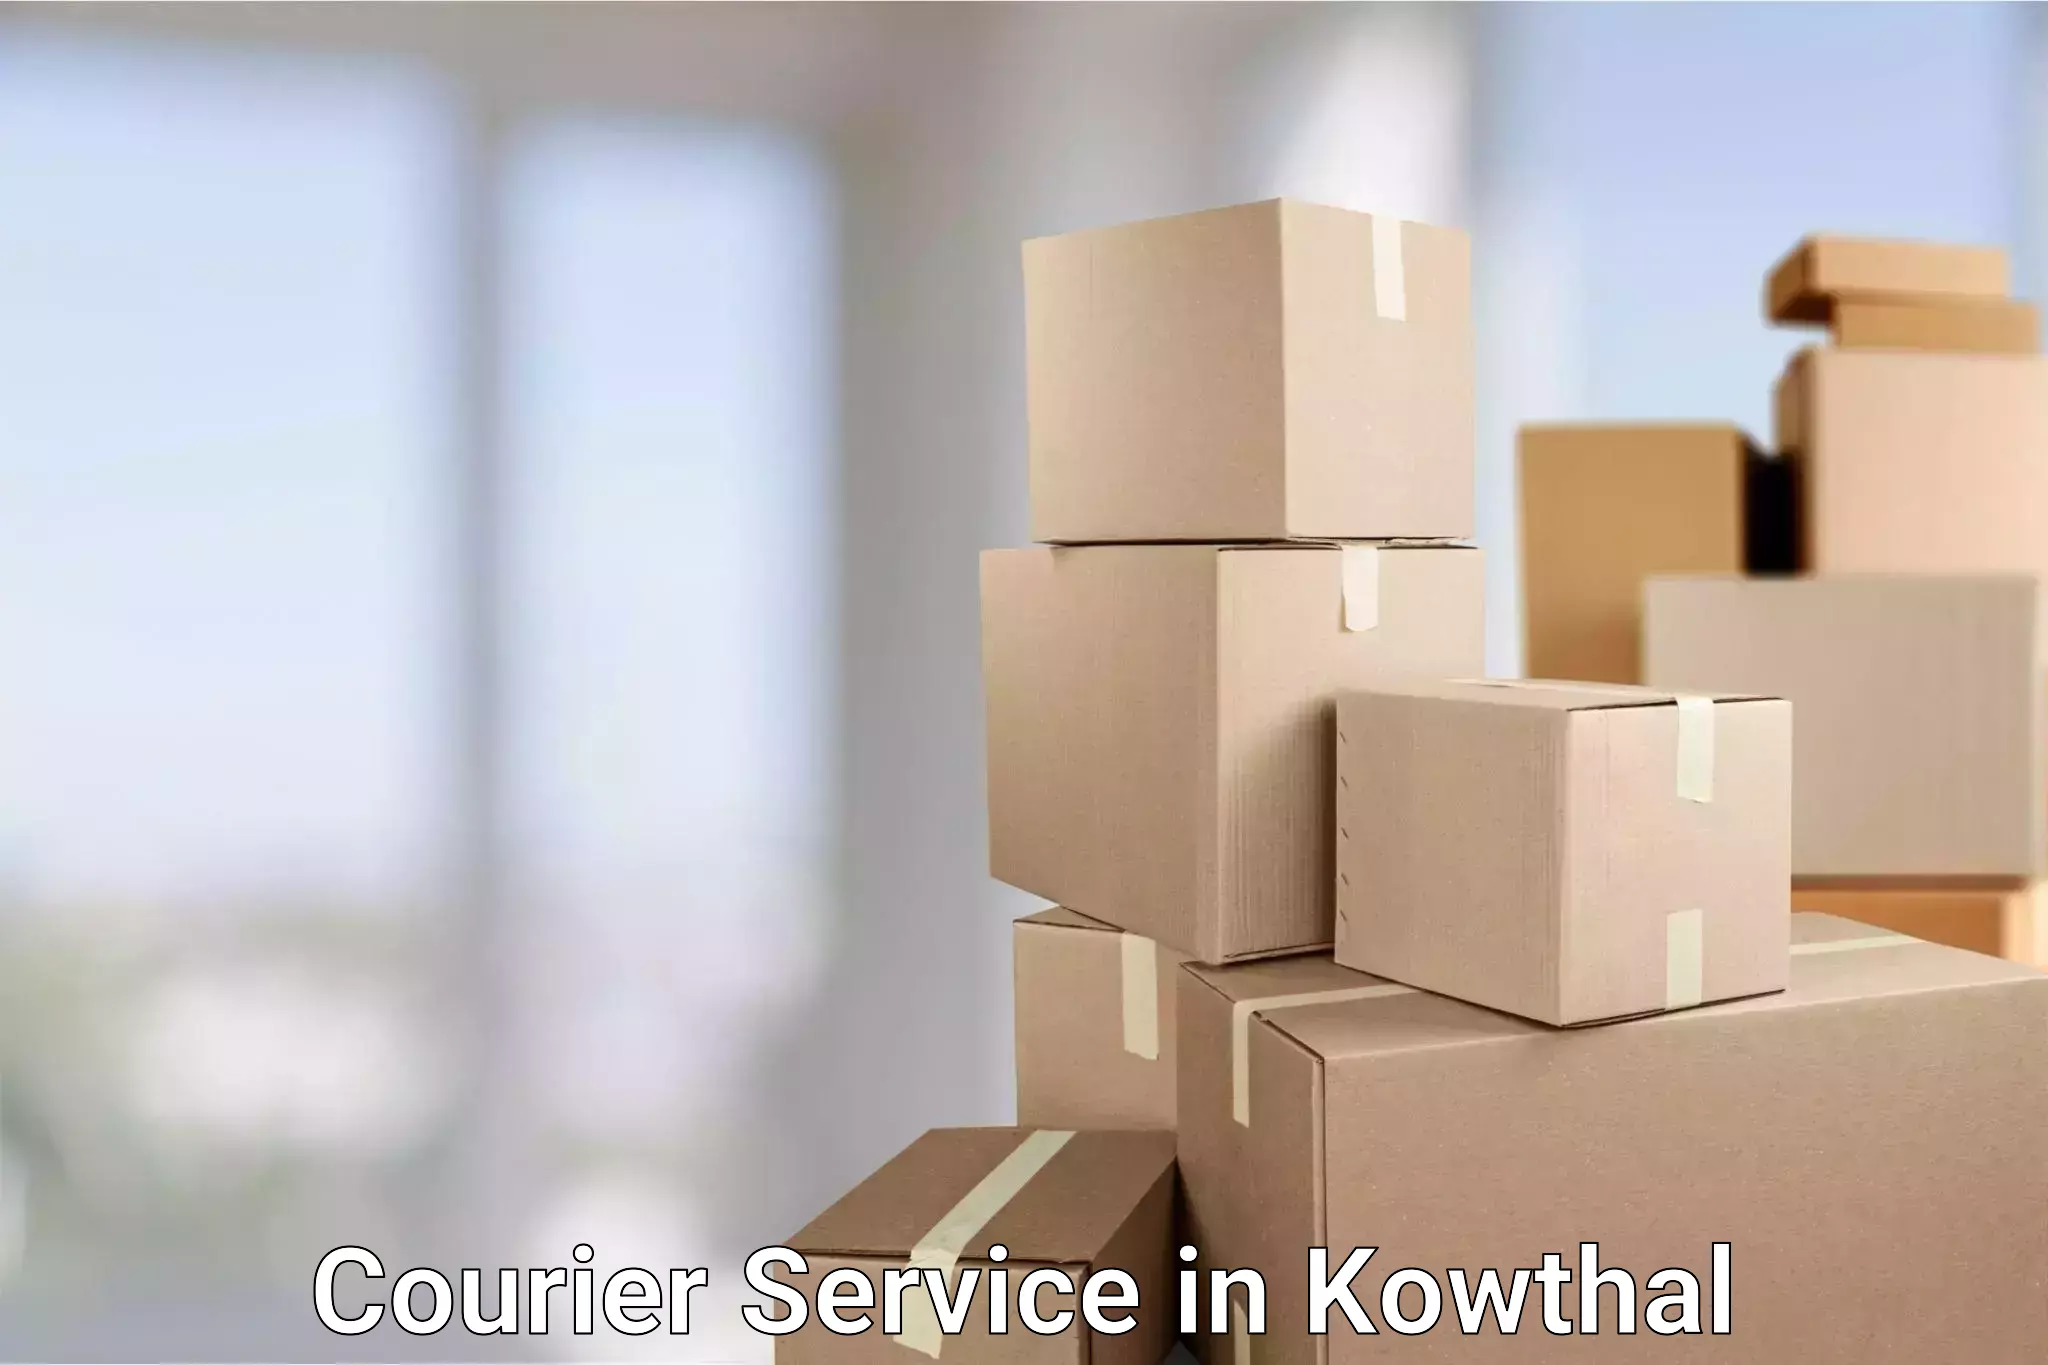 Courier service partnerships in Kowthal